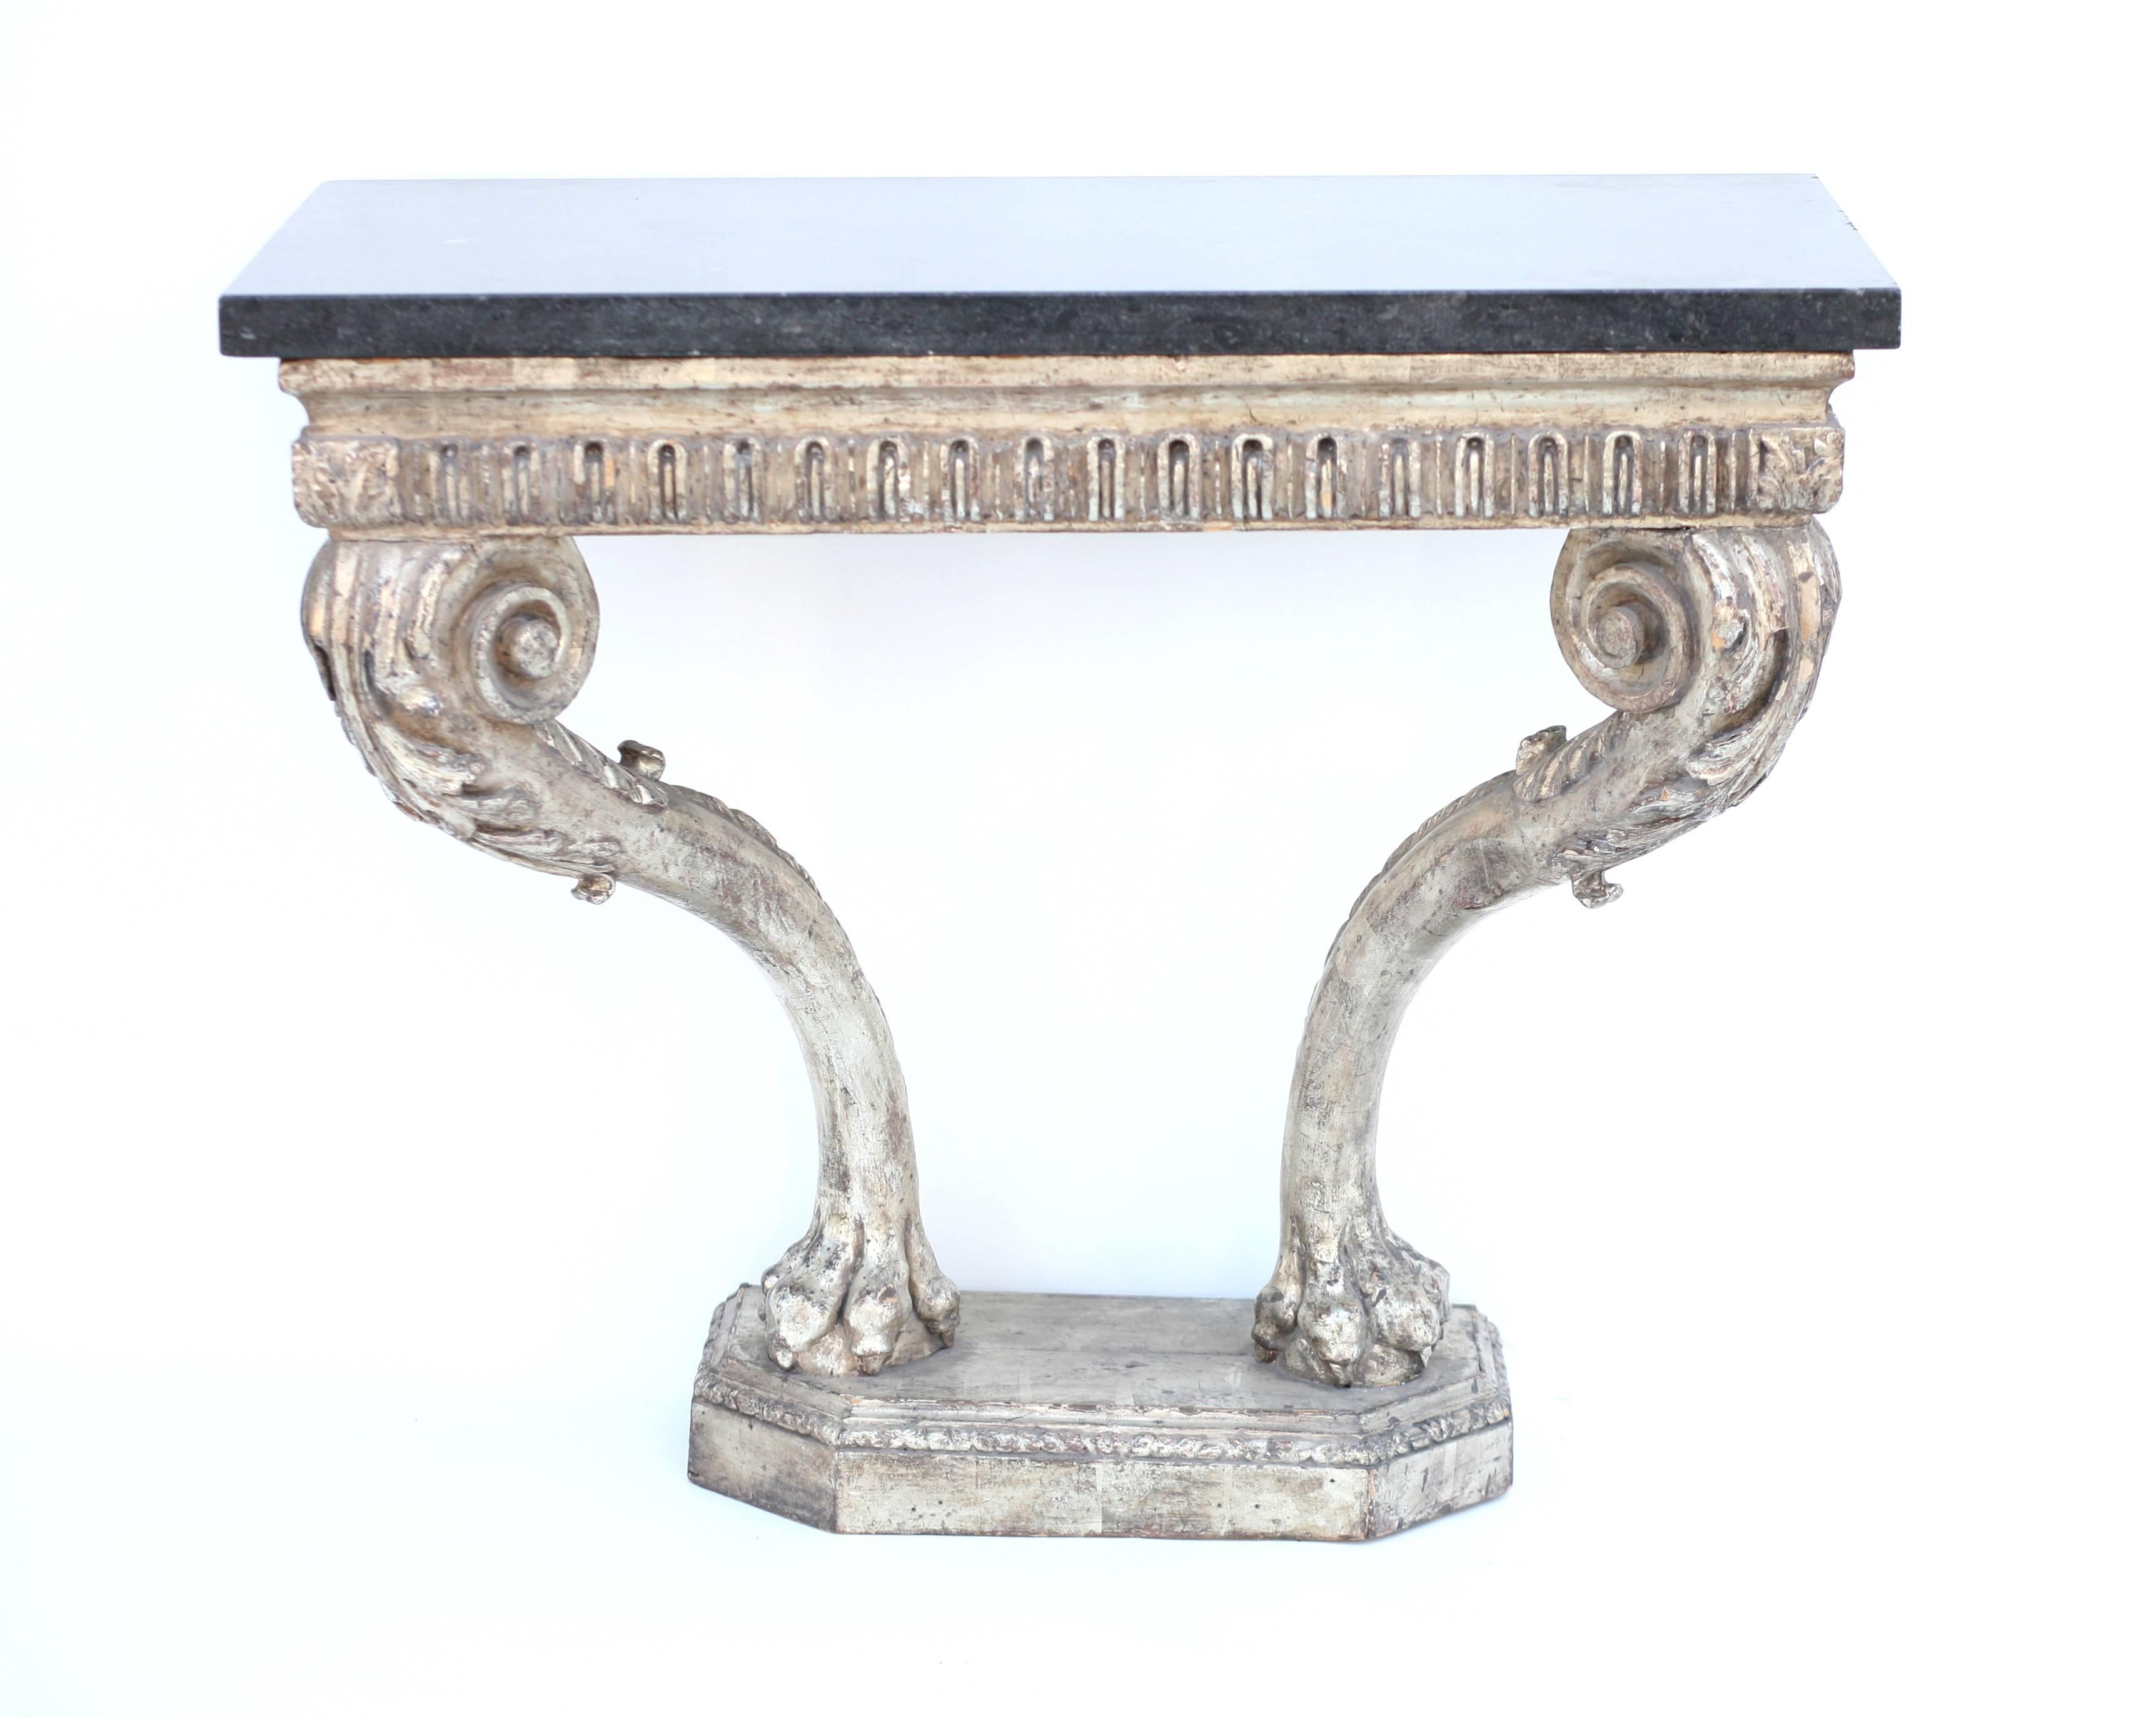 Mid-18th century beautiful period hand-carved George II console, the silver leafed apron with Classic arched fluted above stylized scrolling legs, the knees with carved acanthus culminating in lion paws on a stepped carved base with canted corners.